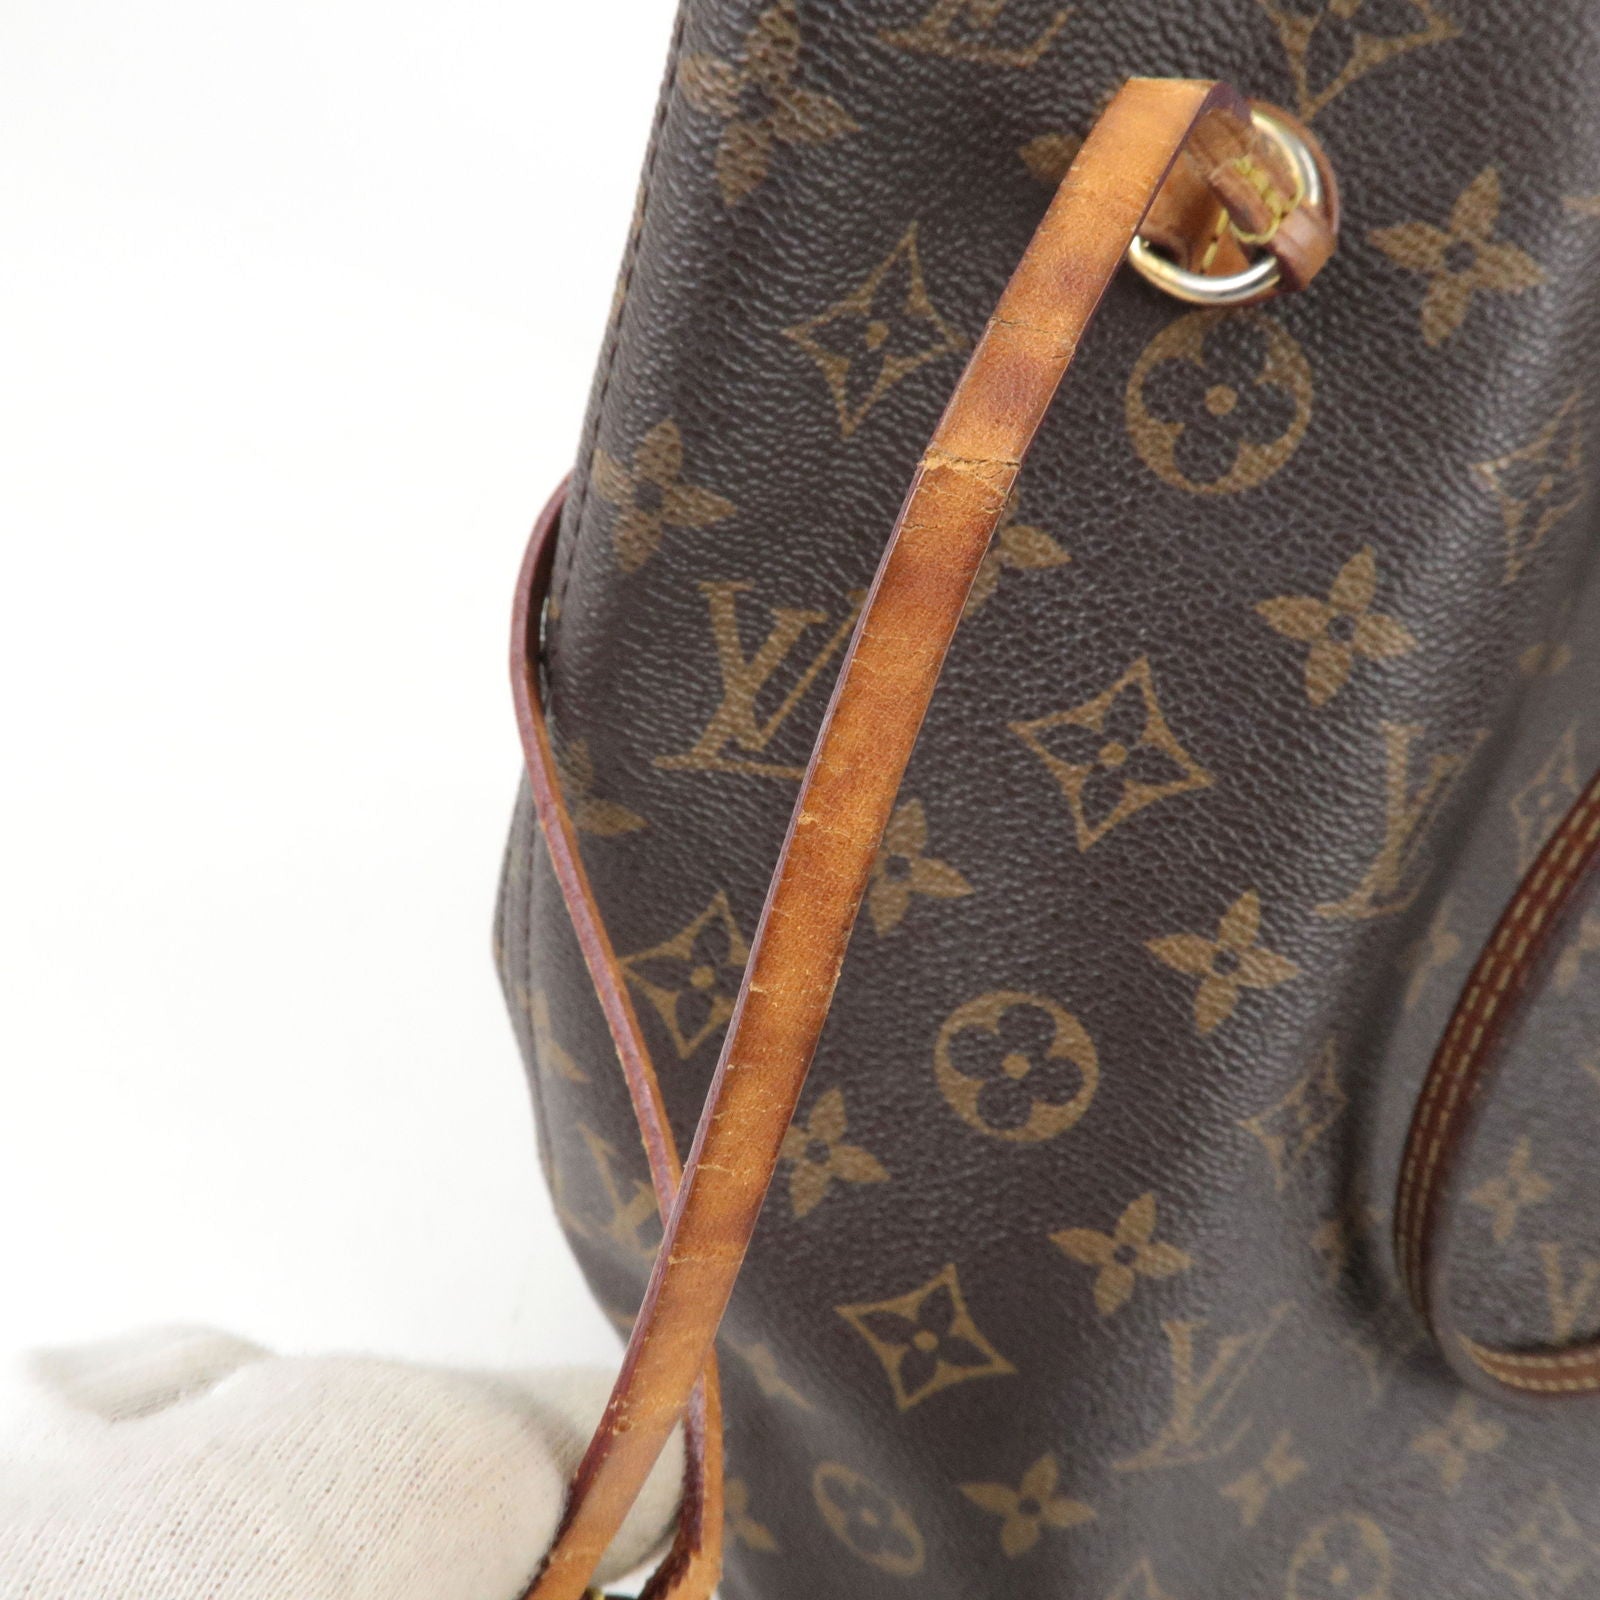 Auth Louis Vuitton Monogram Neverfull MM Tote Bag M40156 Used